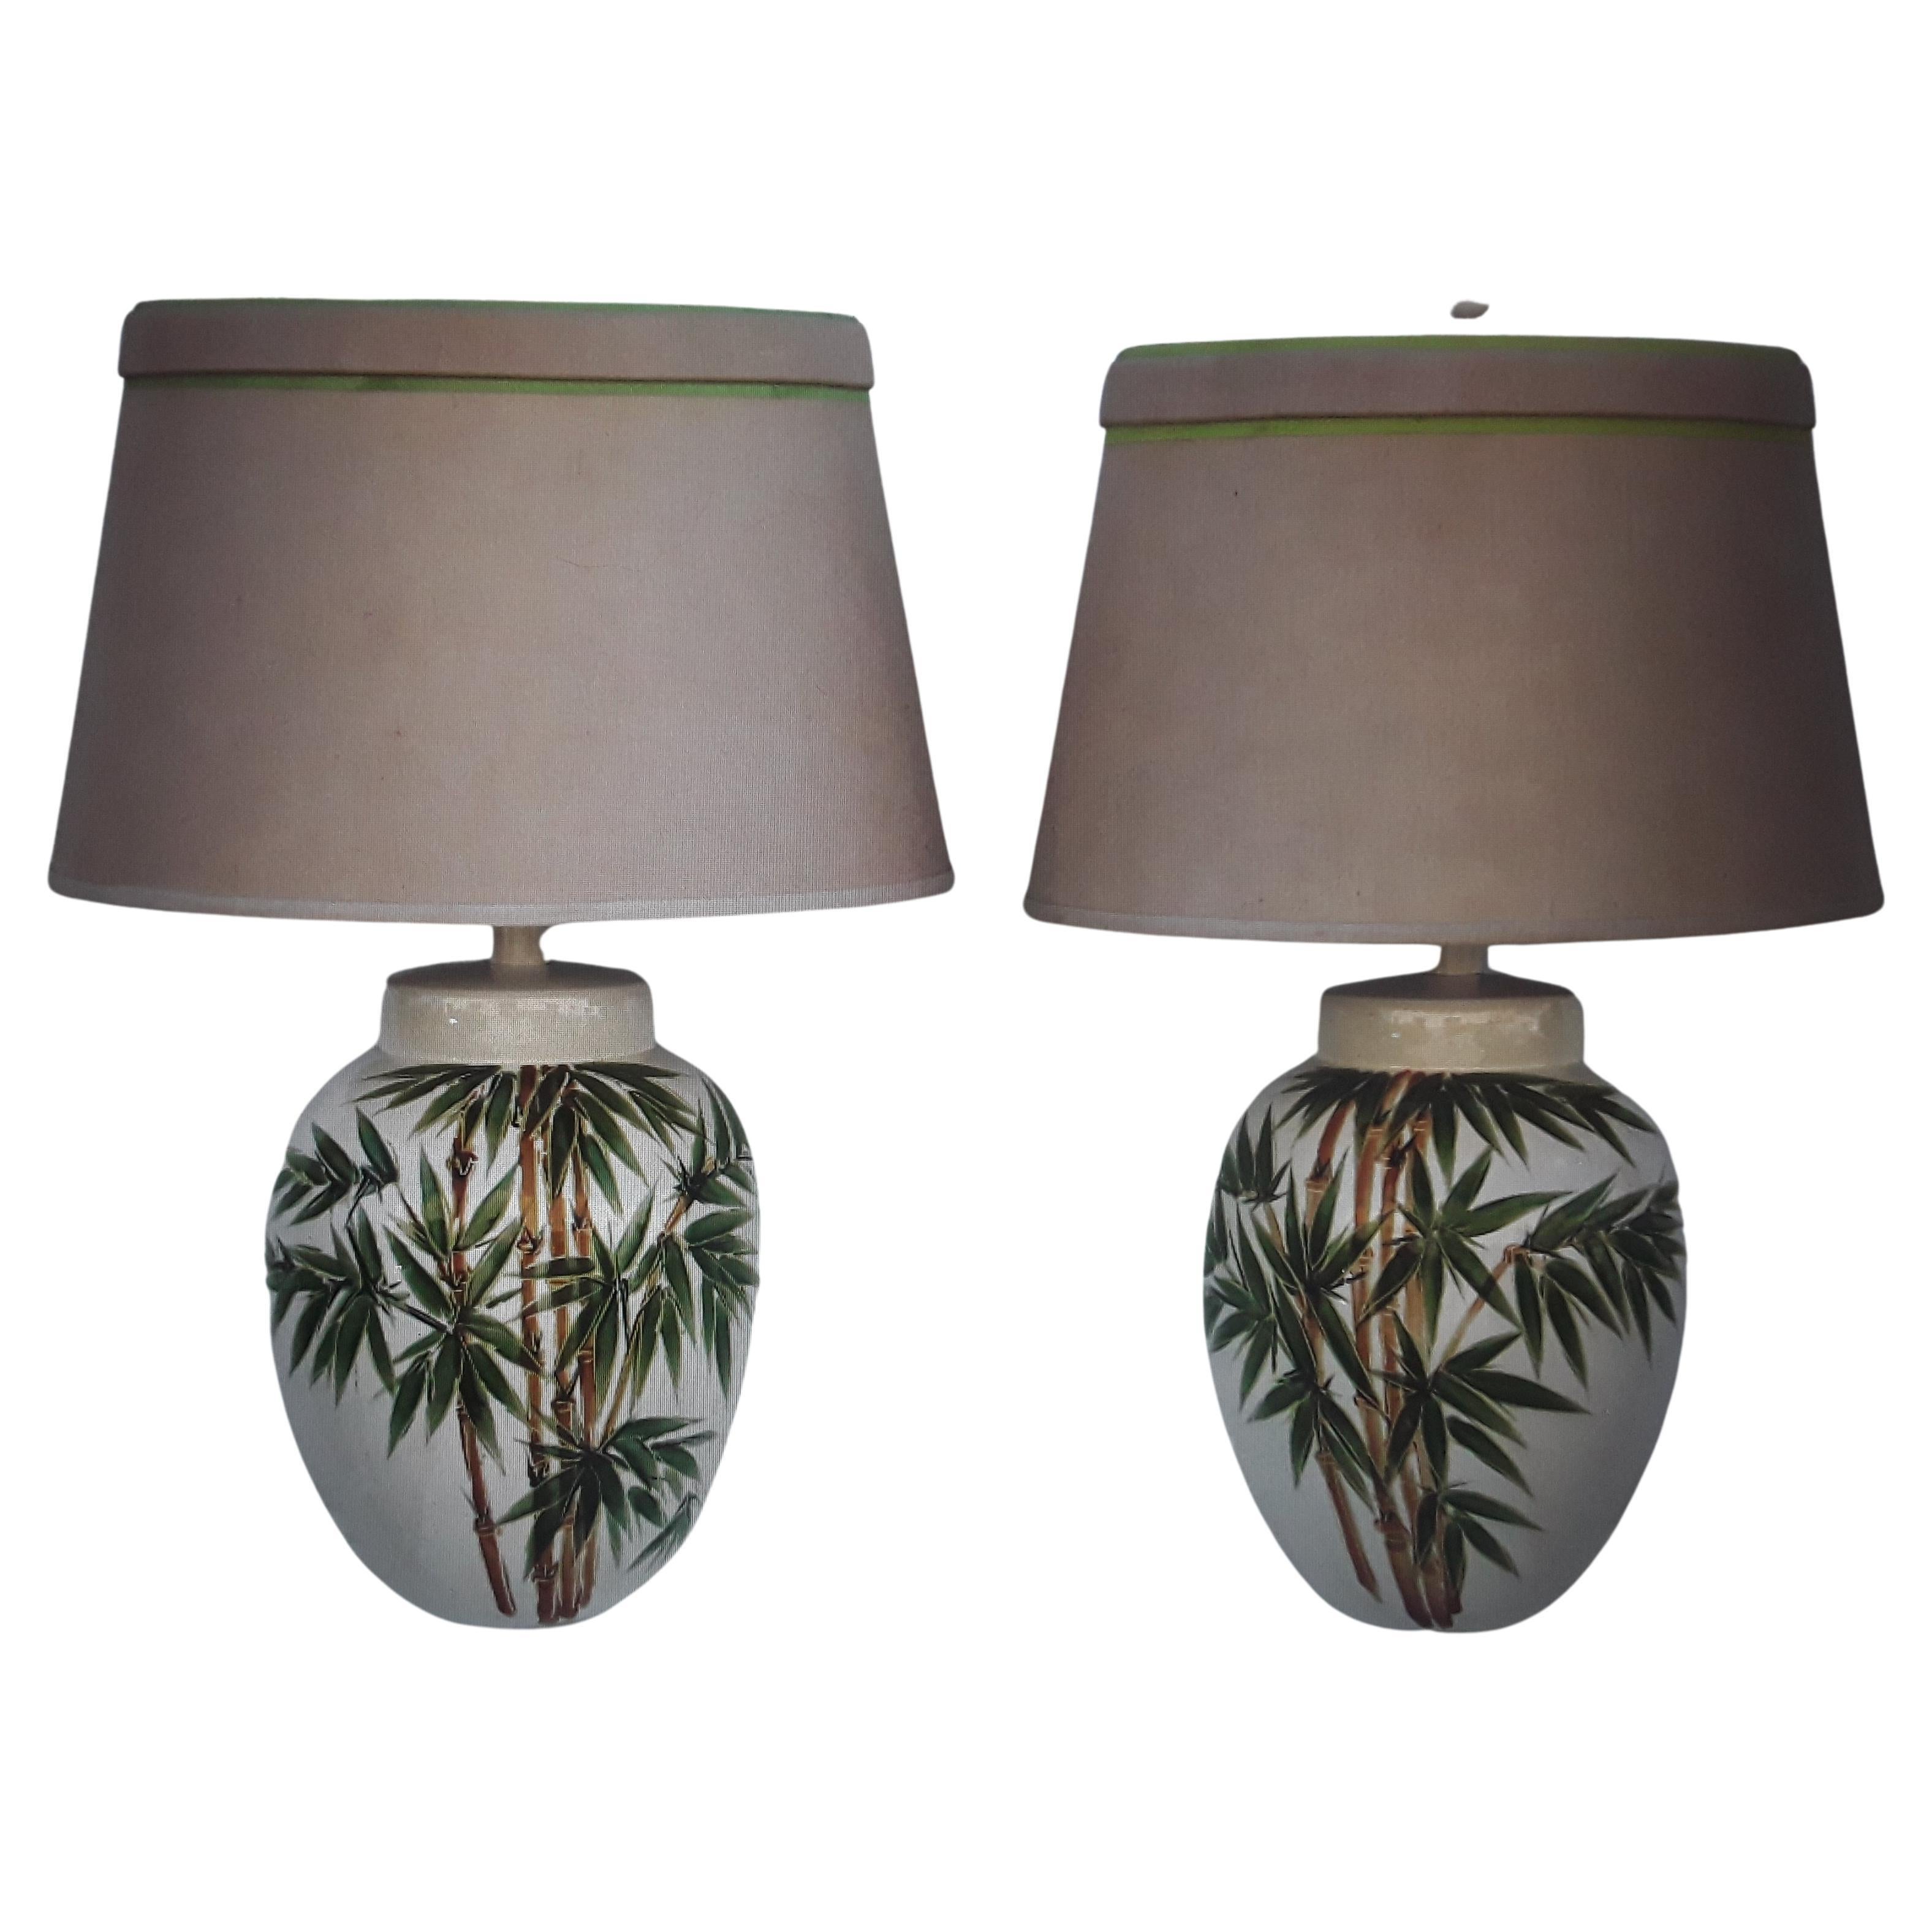 Pair 1950's Mid Century Modern Glazed Terra Cotta Enamlled Palm Trees Lamps For Sale